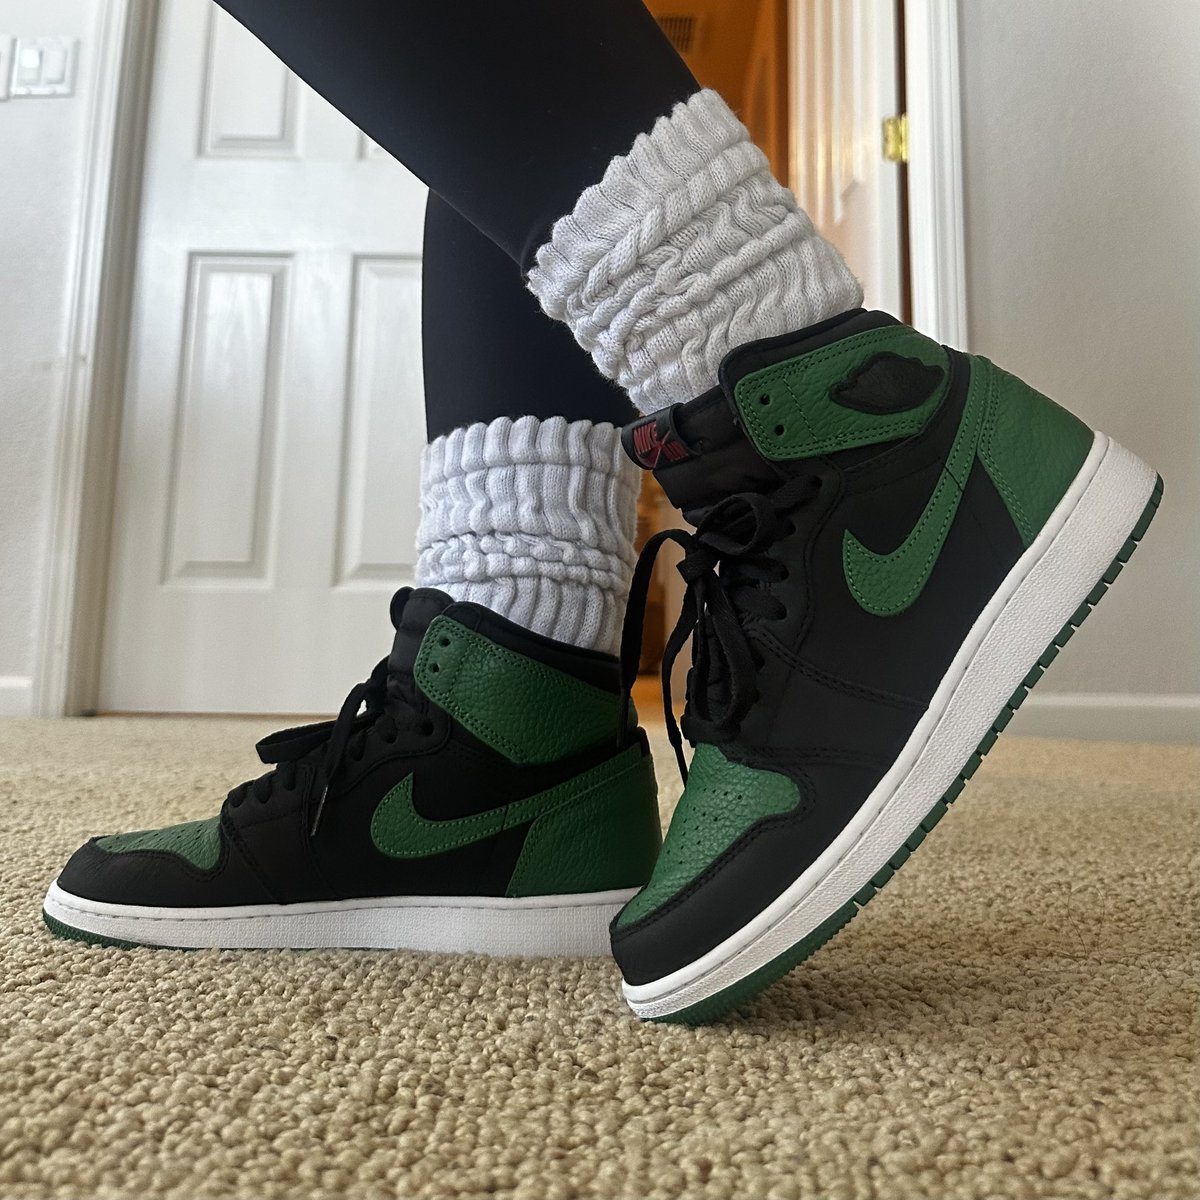 It was a great day. Finally got my hair refreshed by my hairdresser, and my Celtics won game 1 ☘️ #KOTD #snkrskickcheck #CelticsNation #DifferentHere